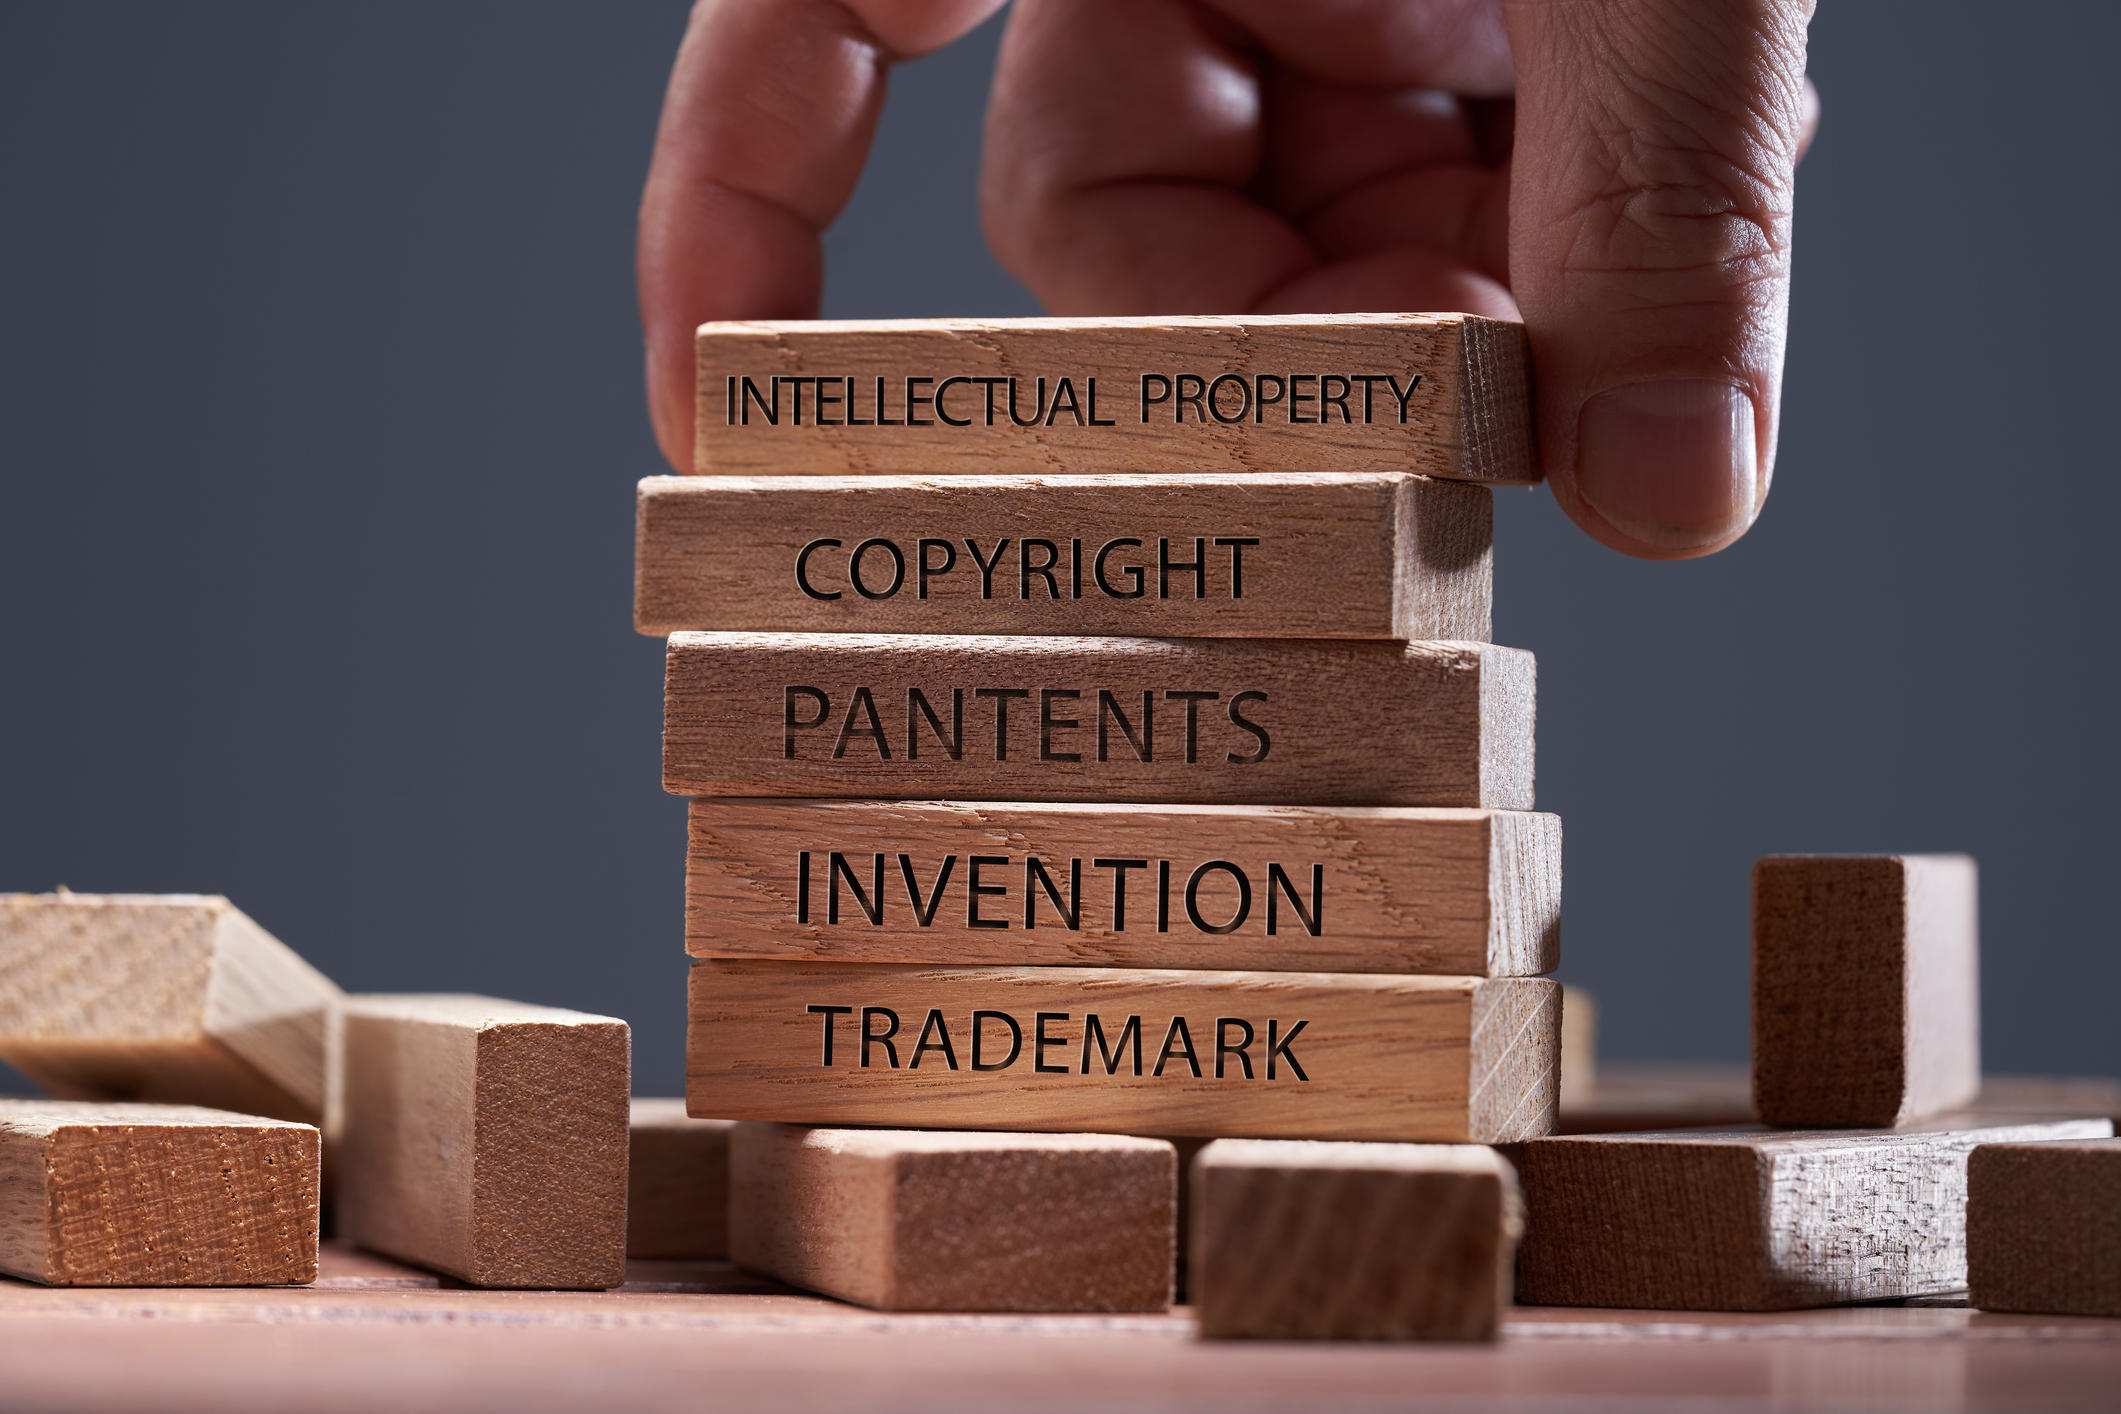 From startups to established enterprises, Shore IP Group offers tailored legal advice to suit your IP needs and budget. Our personalized approach ensures maximum value for your intellectual property assets.